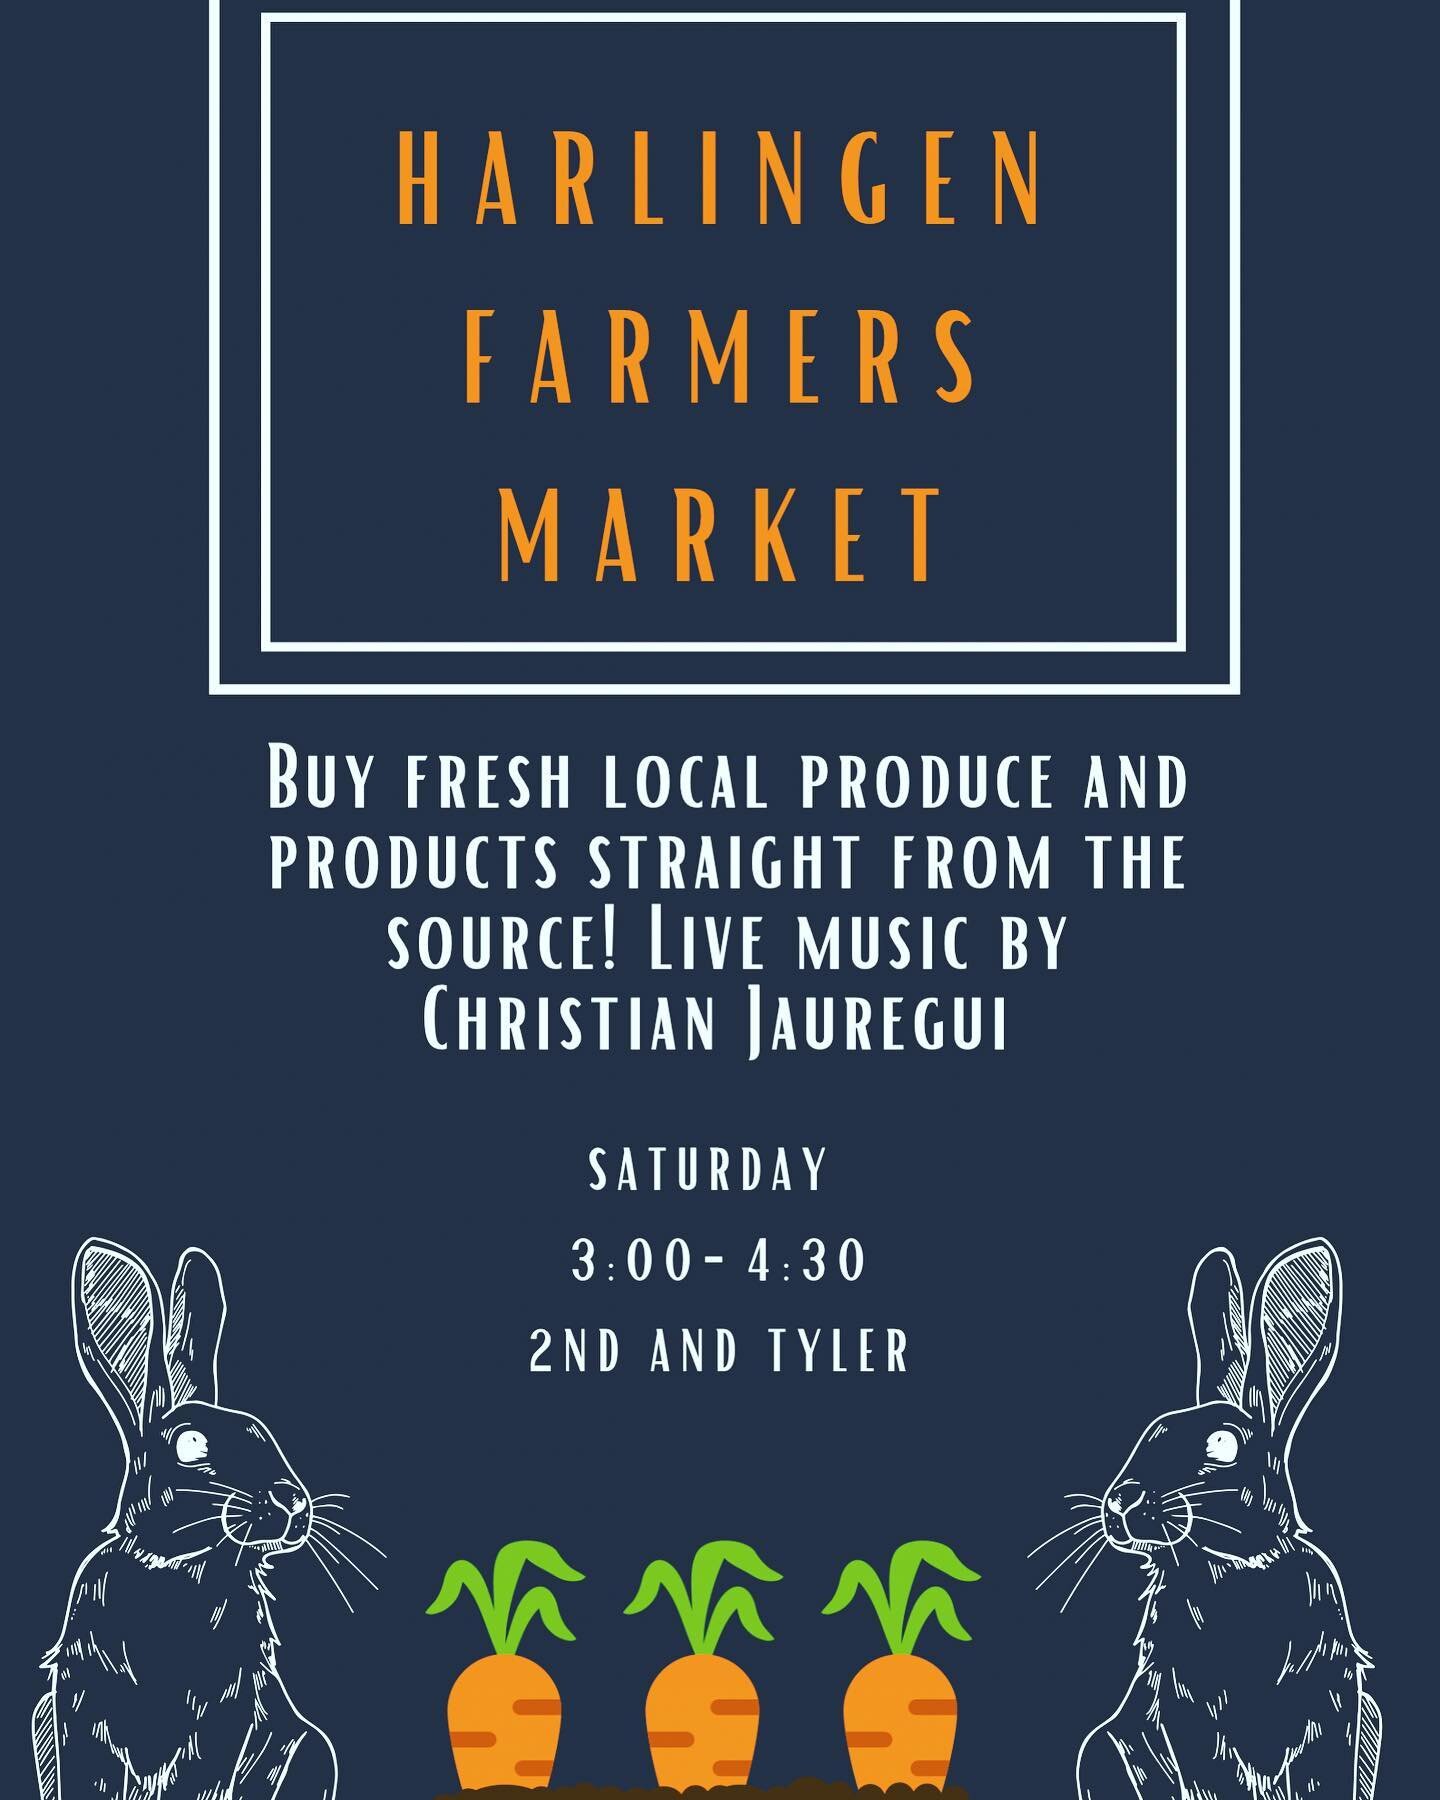 Get all your Easter produce and treats this Saturday at the Harlingen Farmers Market! Coffee, kombucha, vegan treats, baked goods, local strawberries, local produce straight from the farm!